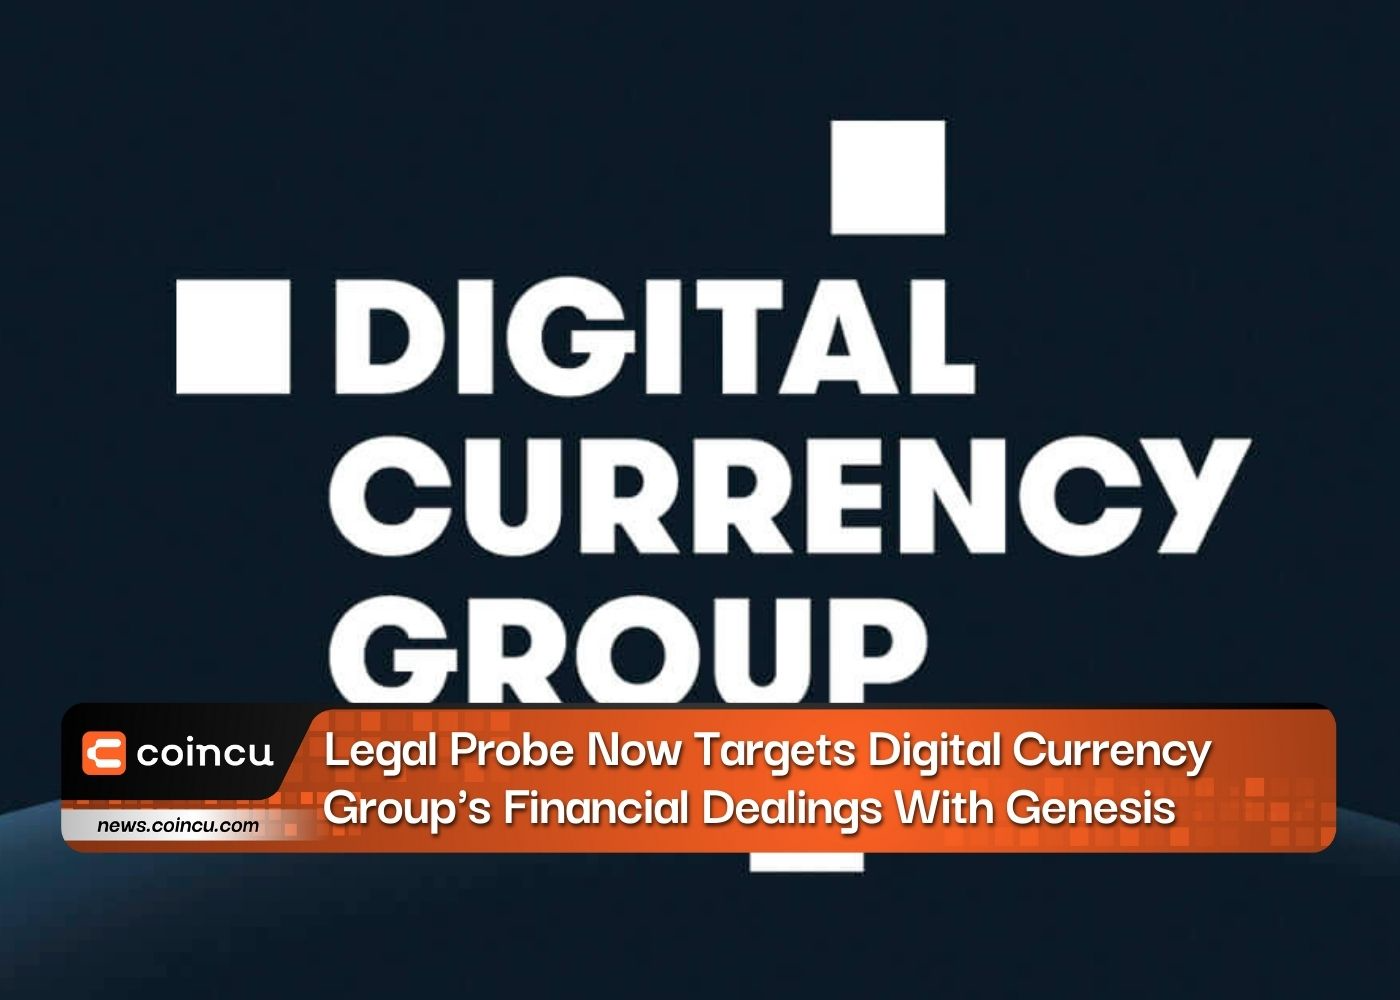 Legal Probe Now Targets Digital Currency Group's Financial Dealings With Genesis